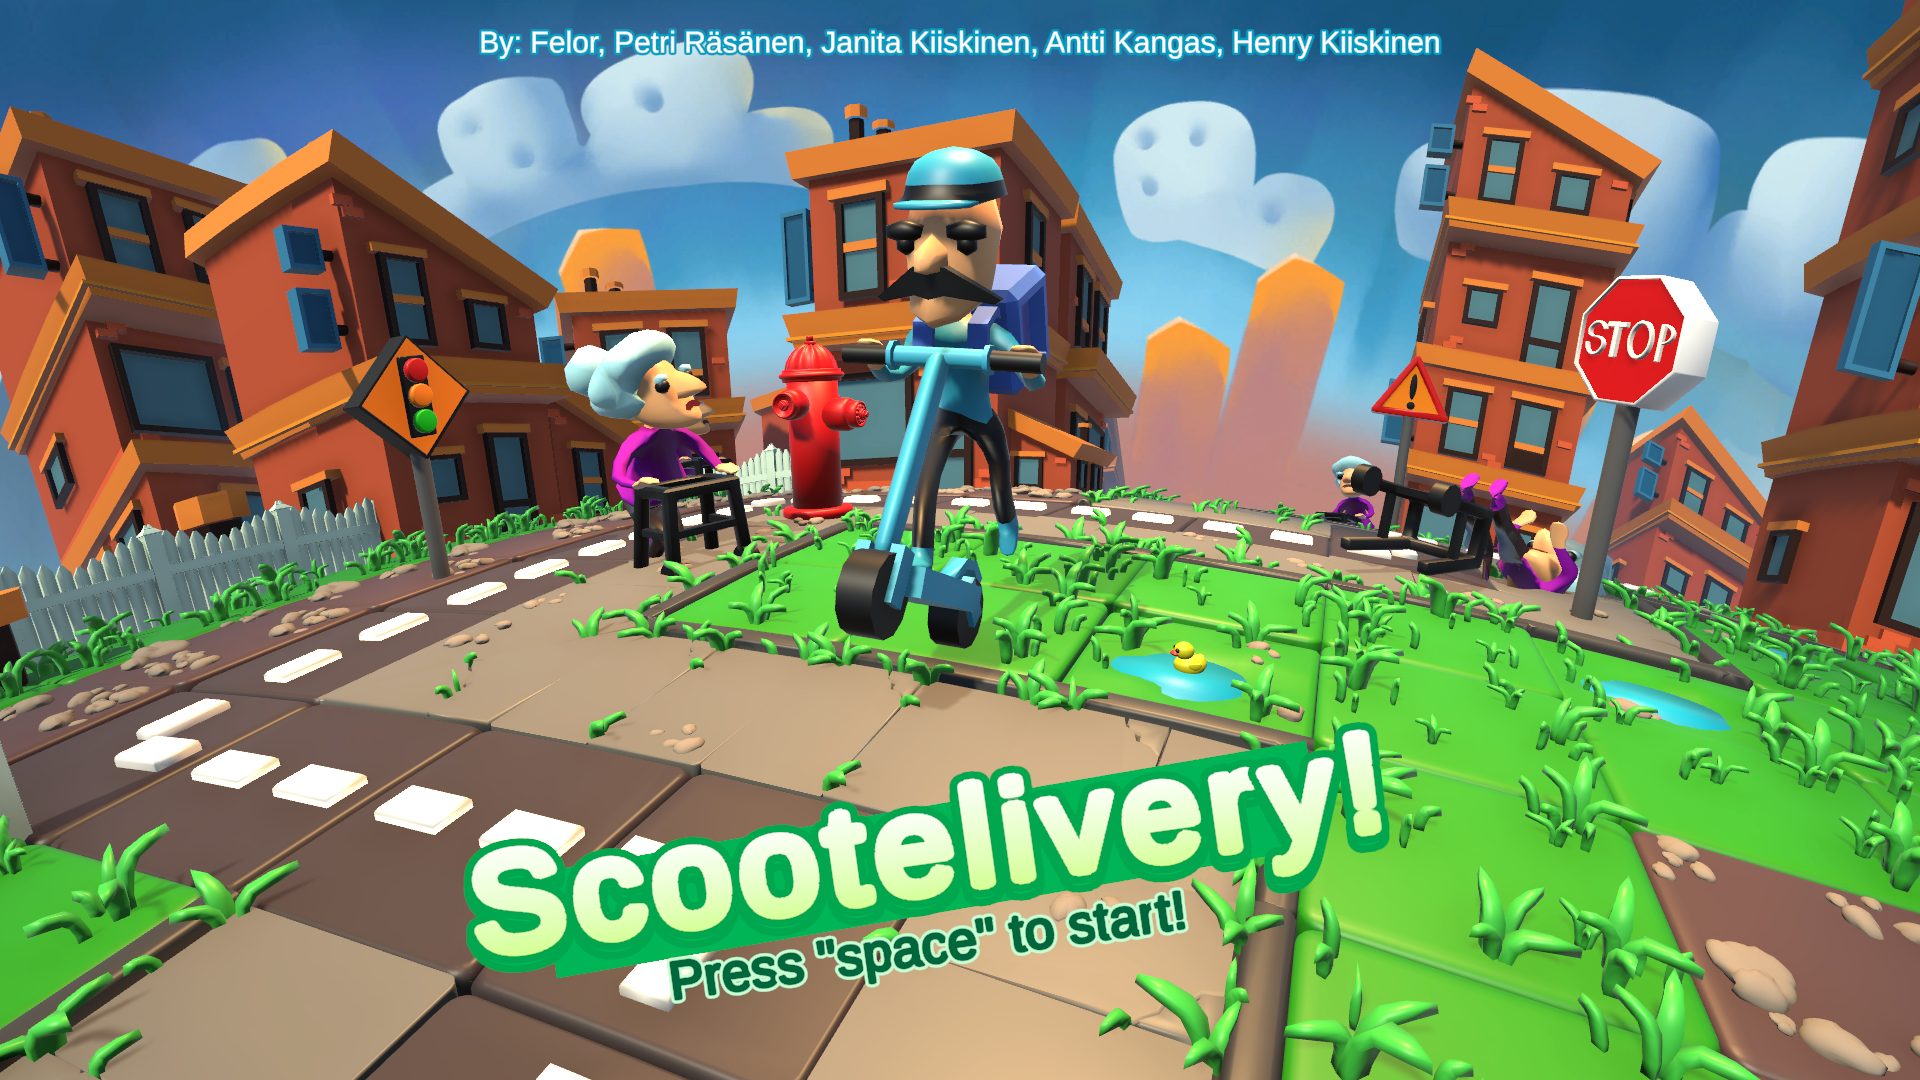 Scootelivery